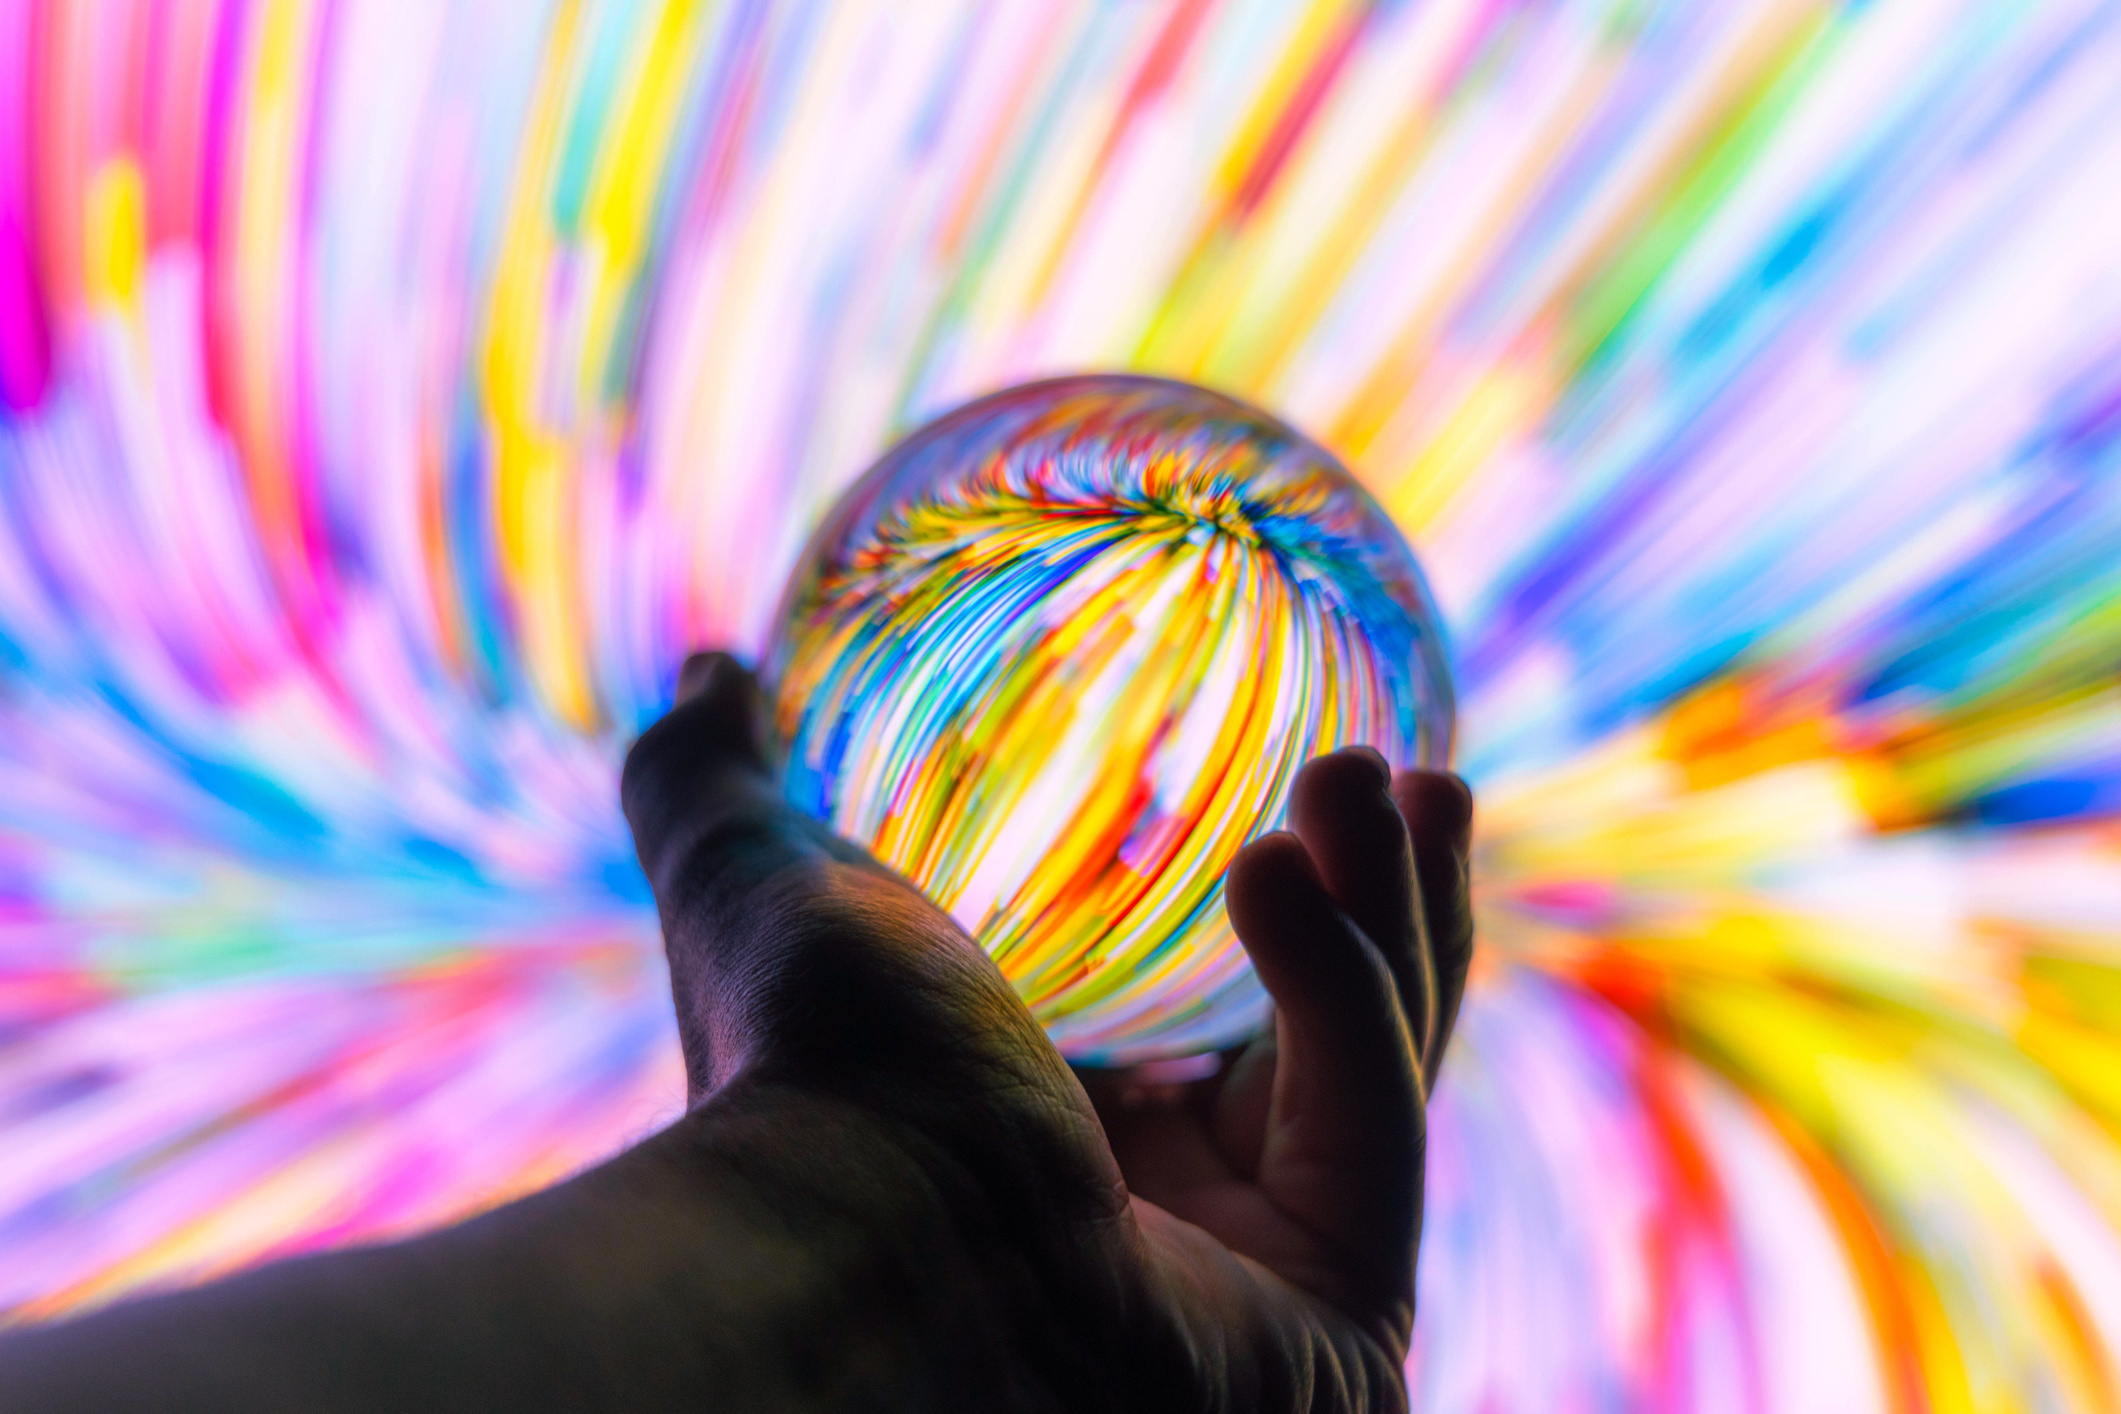 Holding a crystal ball through colorful background at night.